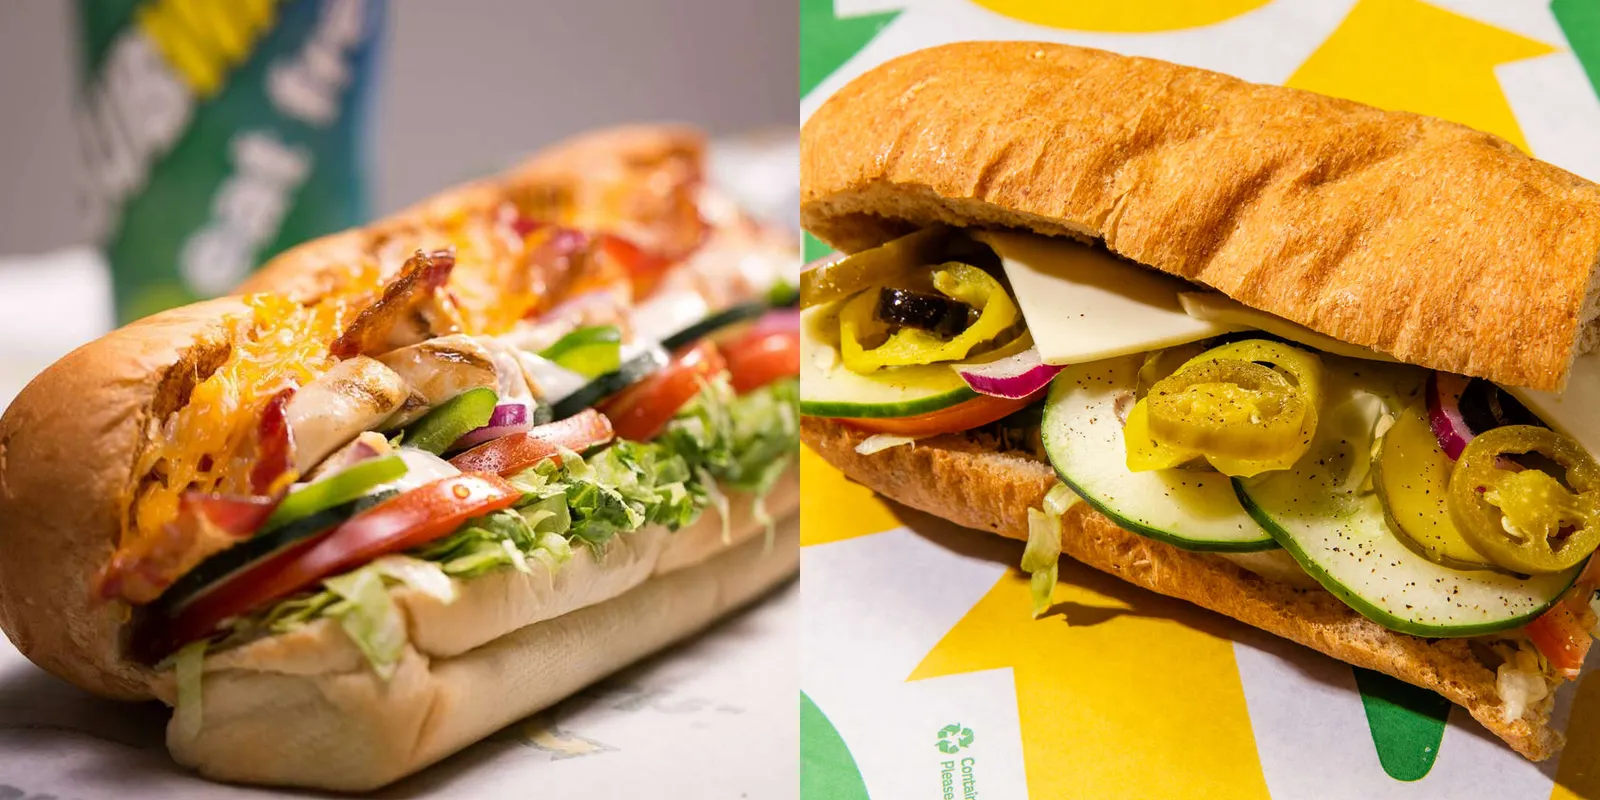 Subway Lunch Hours